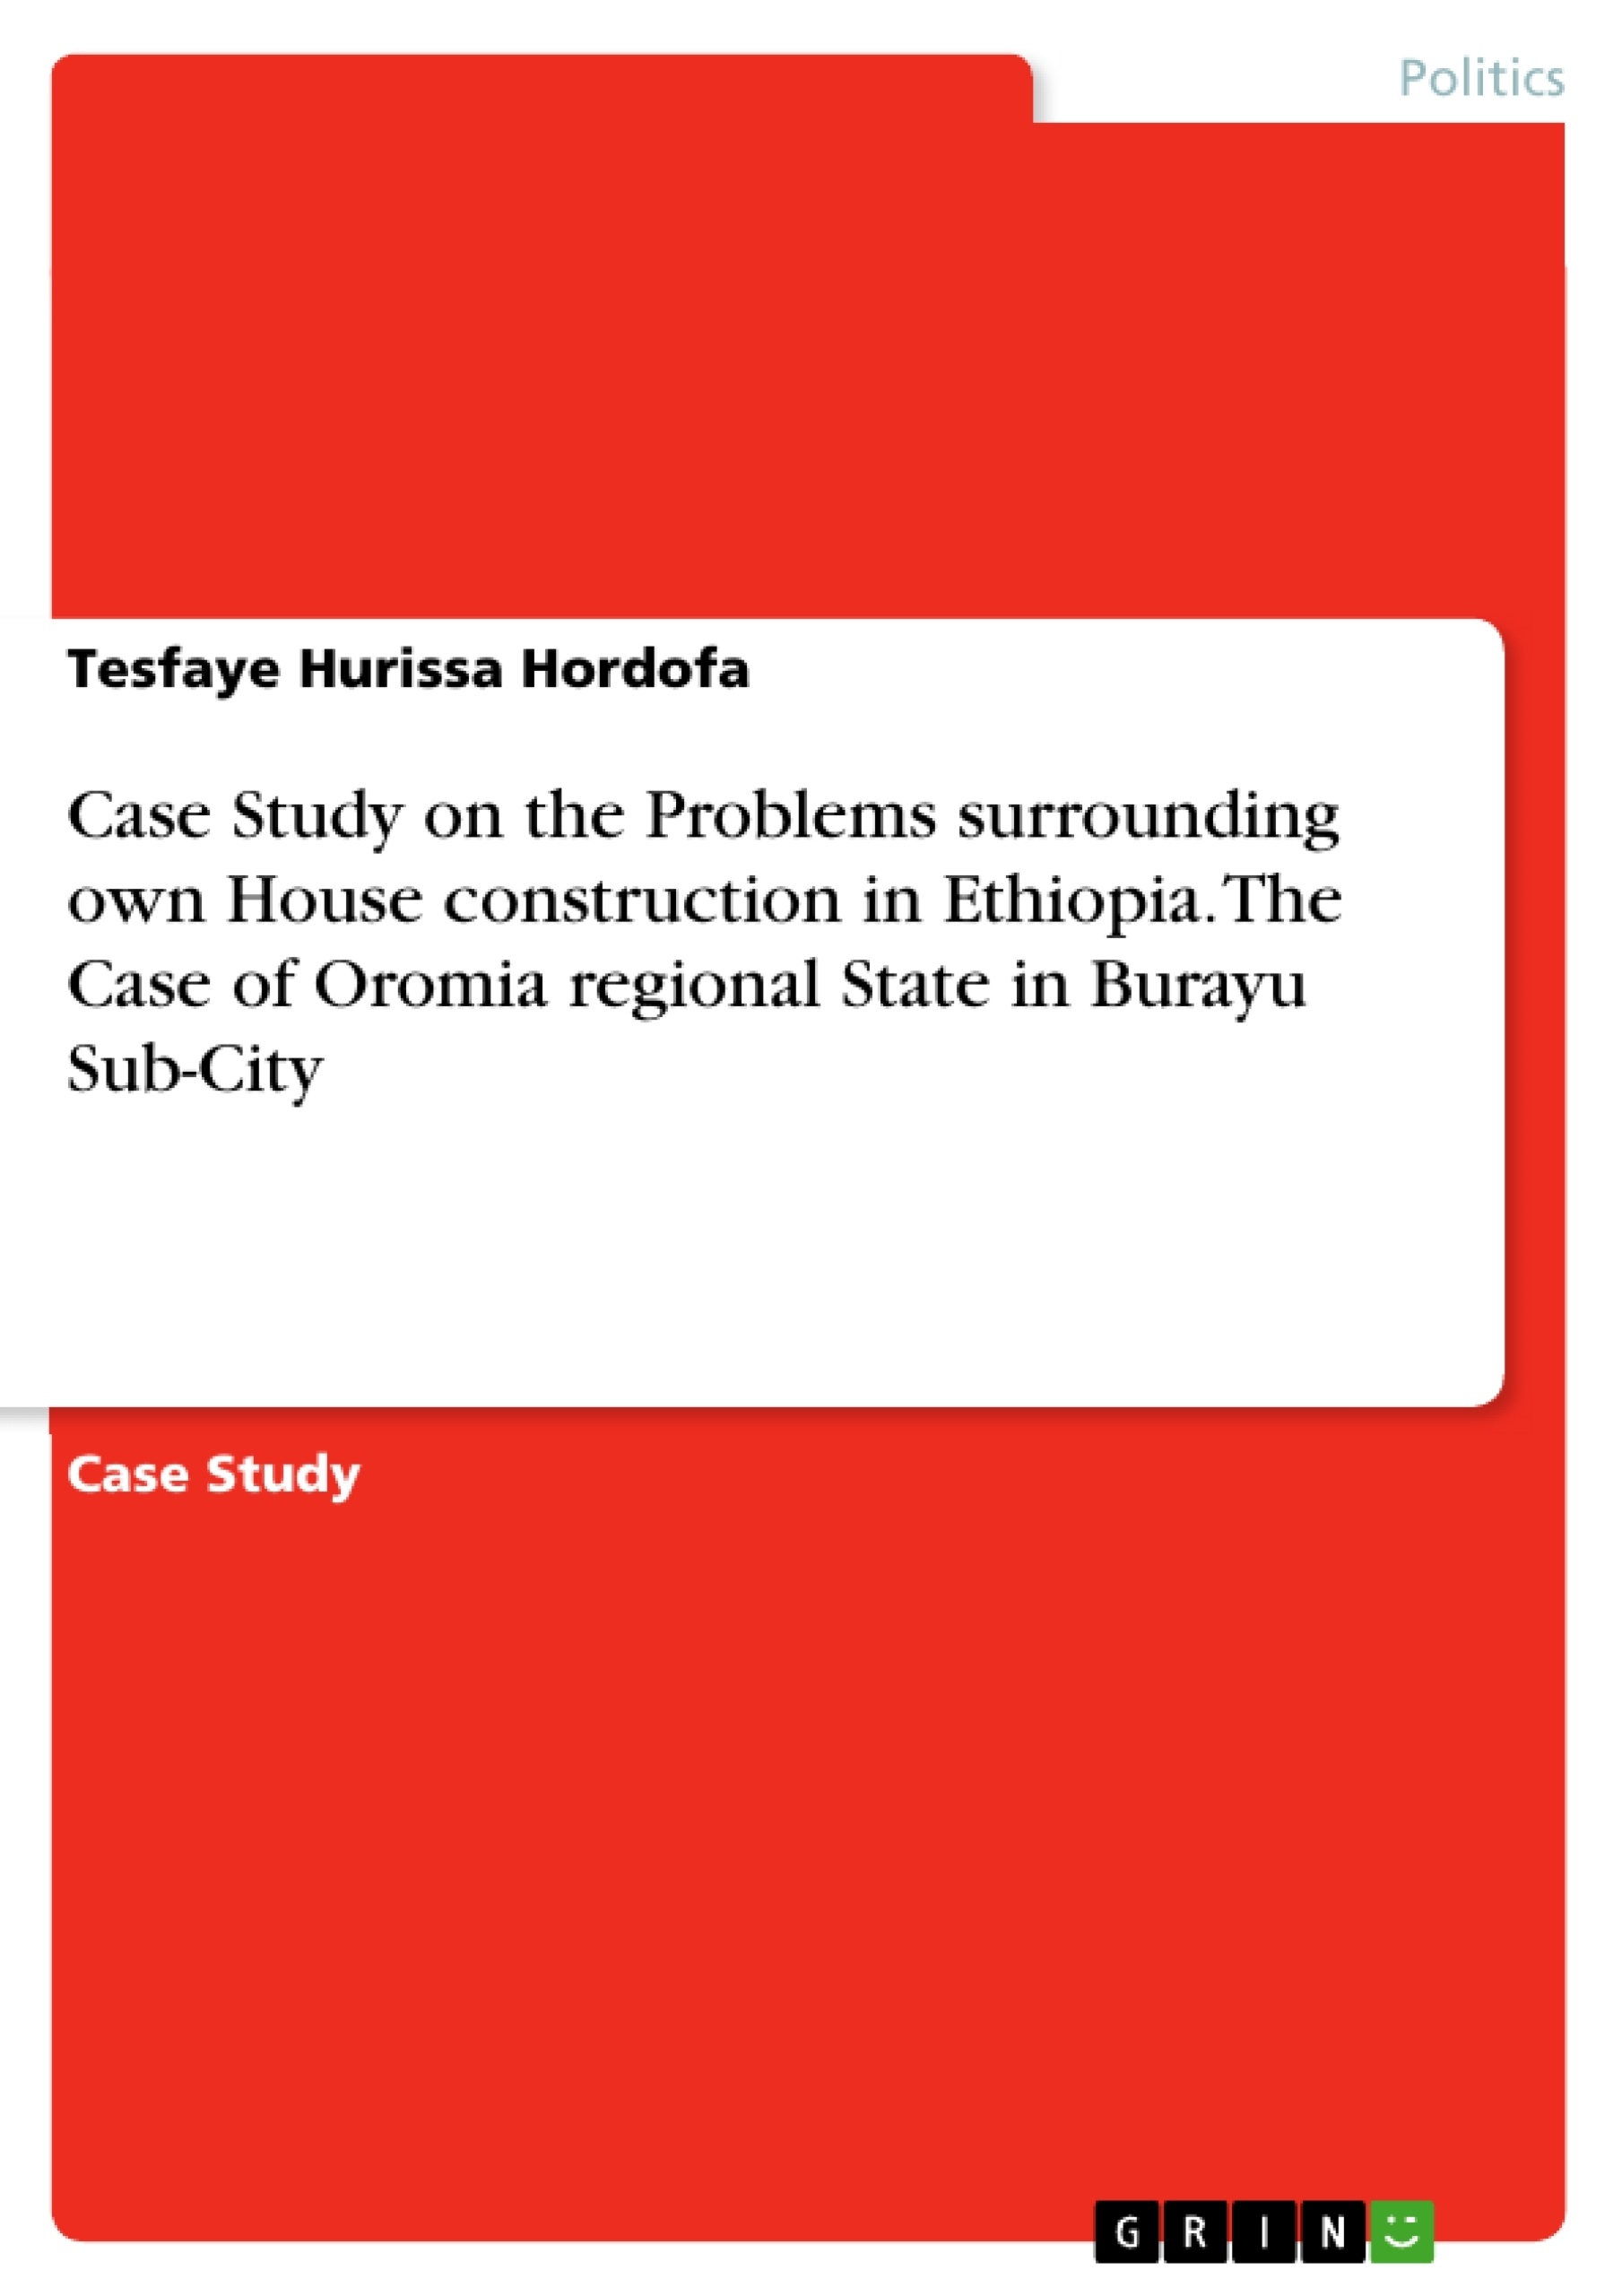 Title: Case Study on the Problems surrounding own House construction in Ethiopia. The Case of Oromia regional State in Burayu Sub-City